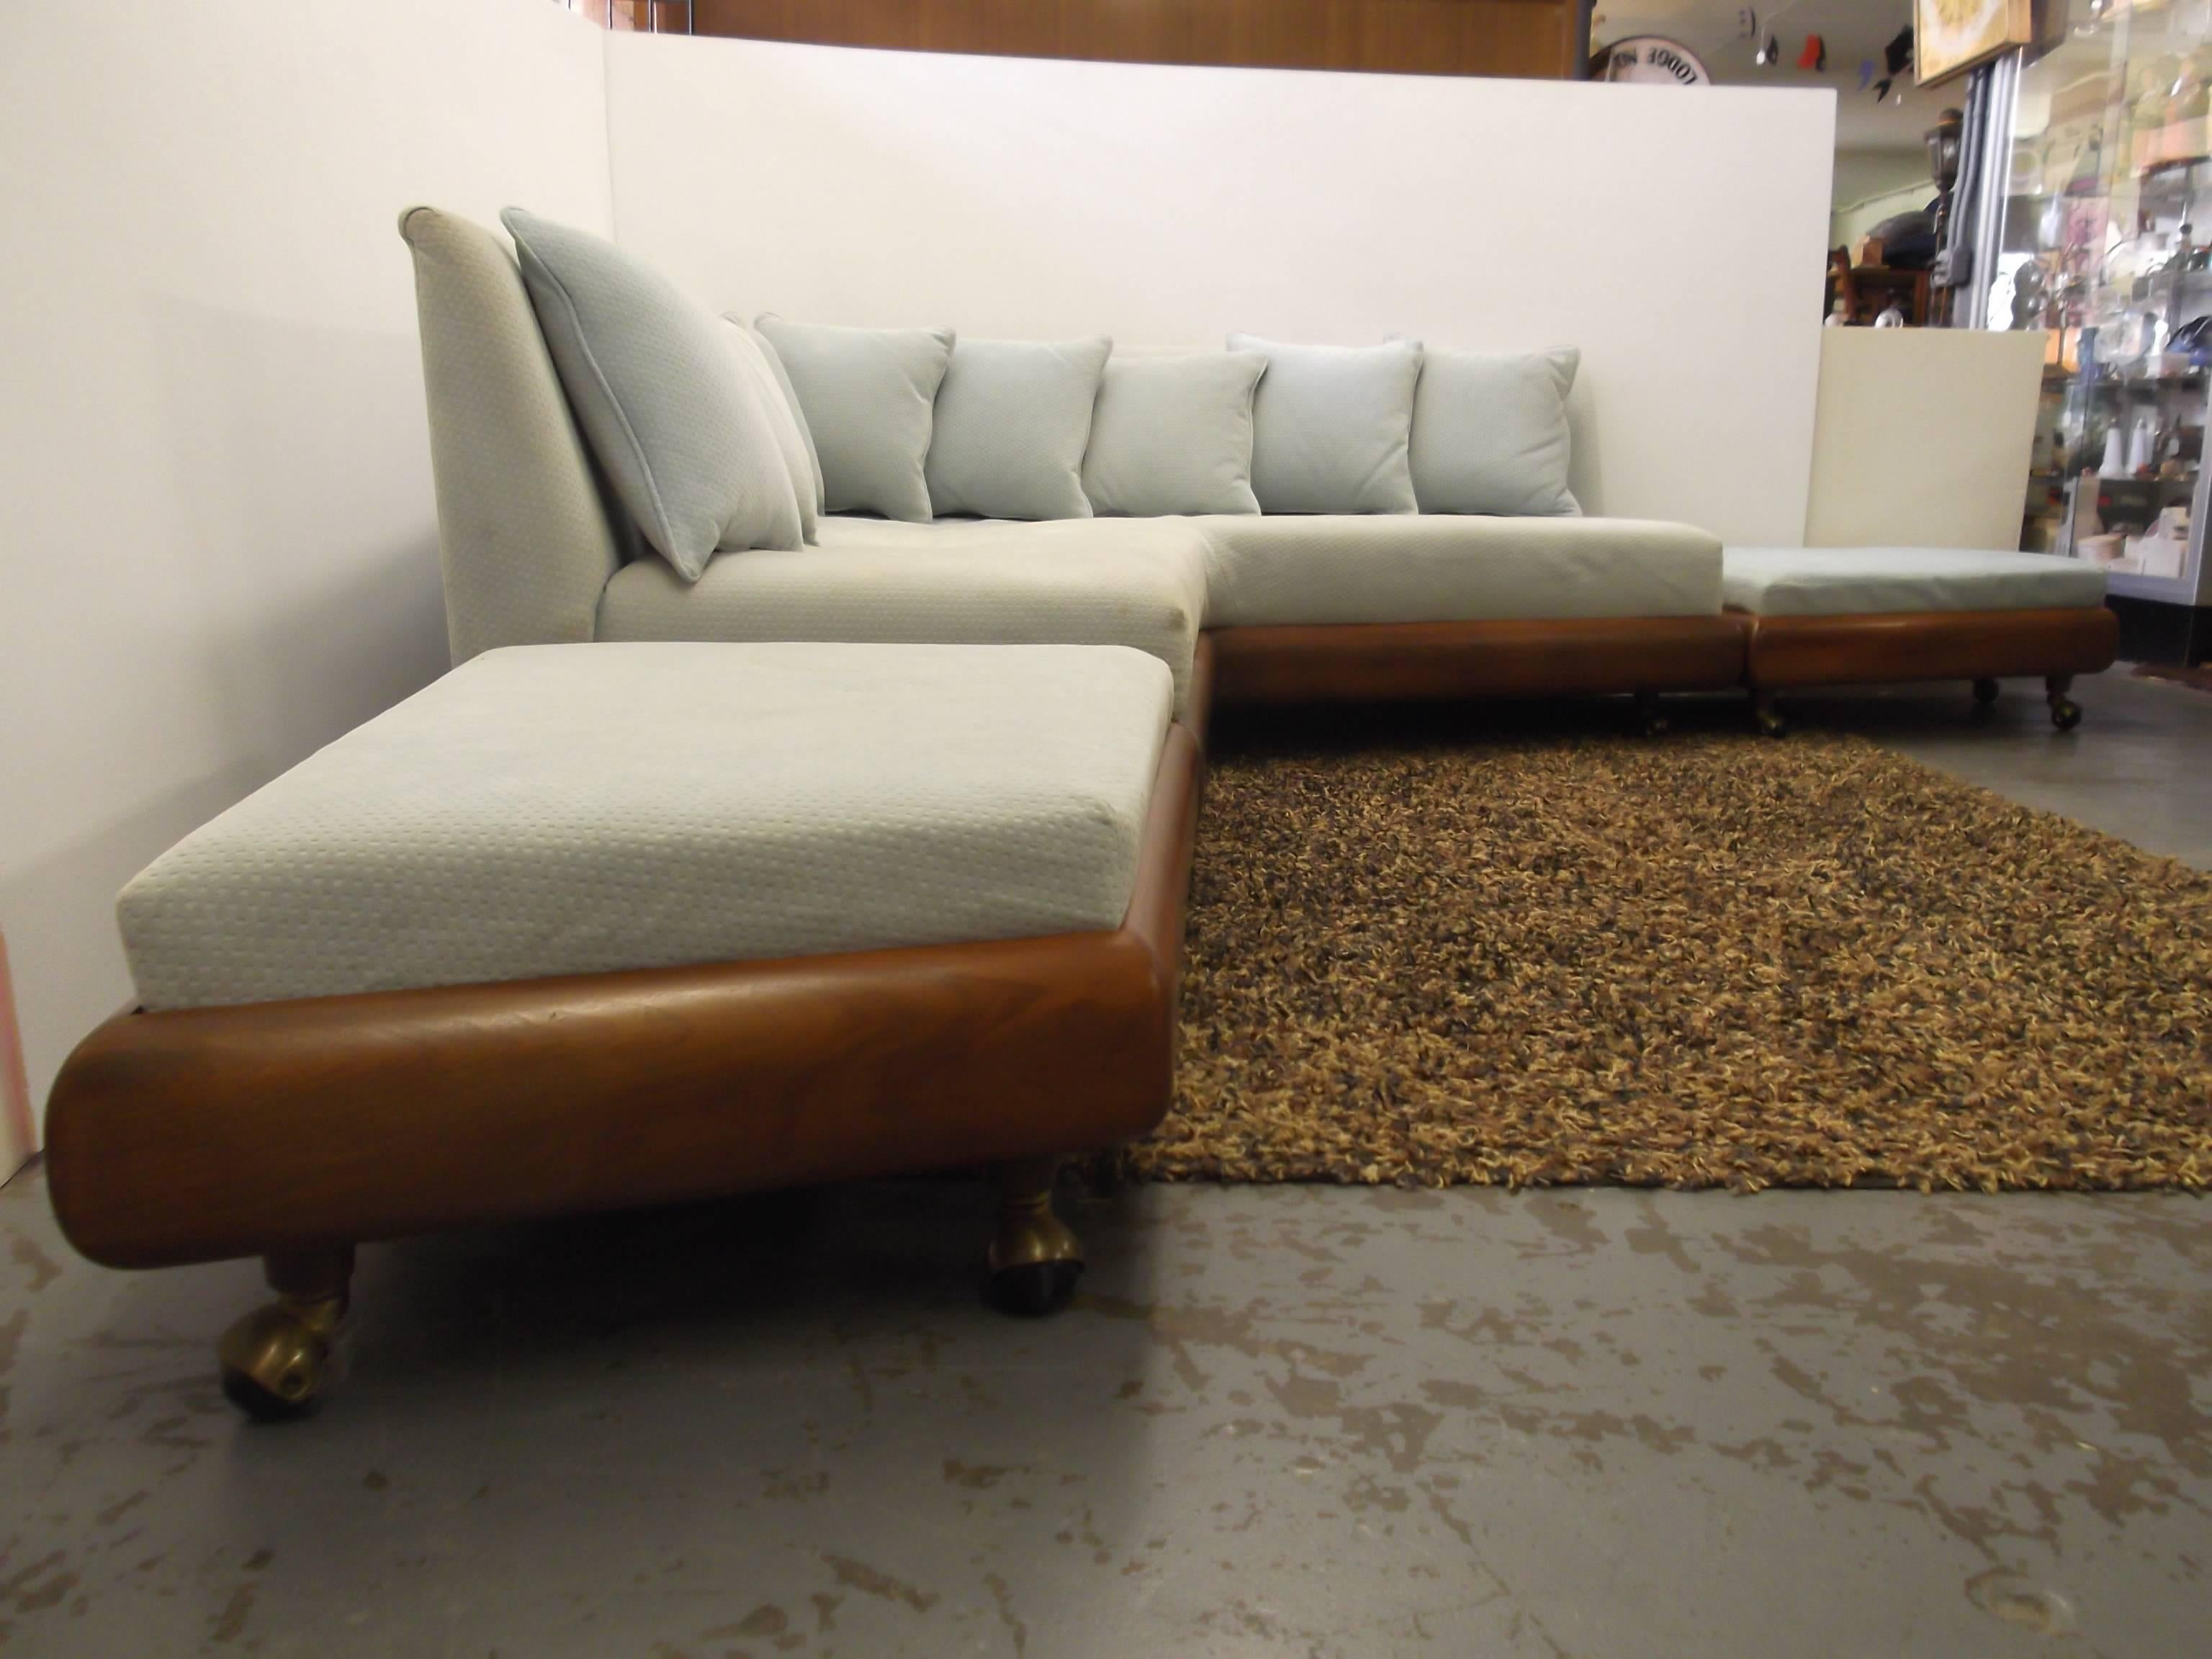 This is one of the coolest Adrian Pearsall sofas out there! It consists of an L-shape sofa, with two floating ottomans that you can configure to the ends to make it a 9+ foot sofa in each direction! All pieces are on casters. The sofa is shaped like